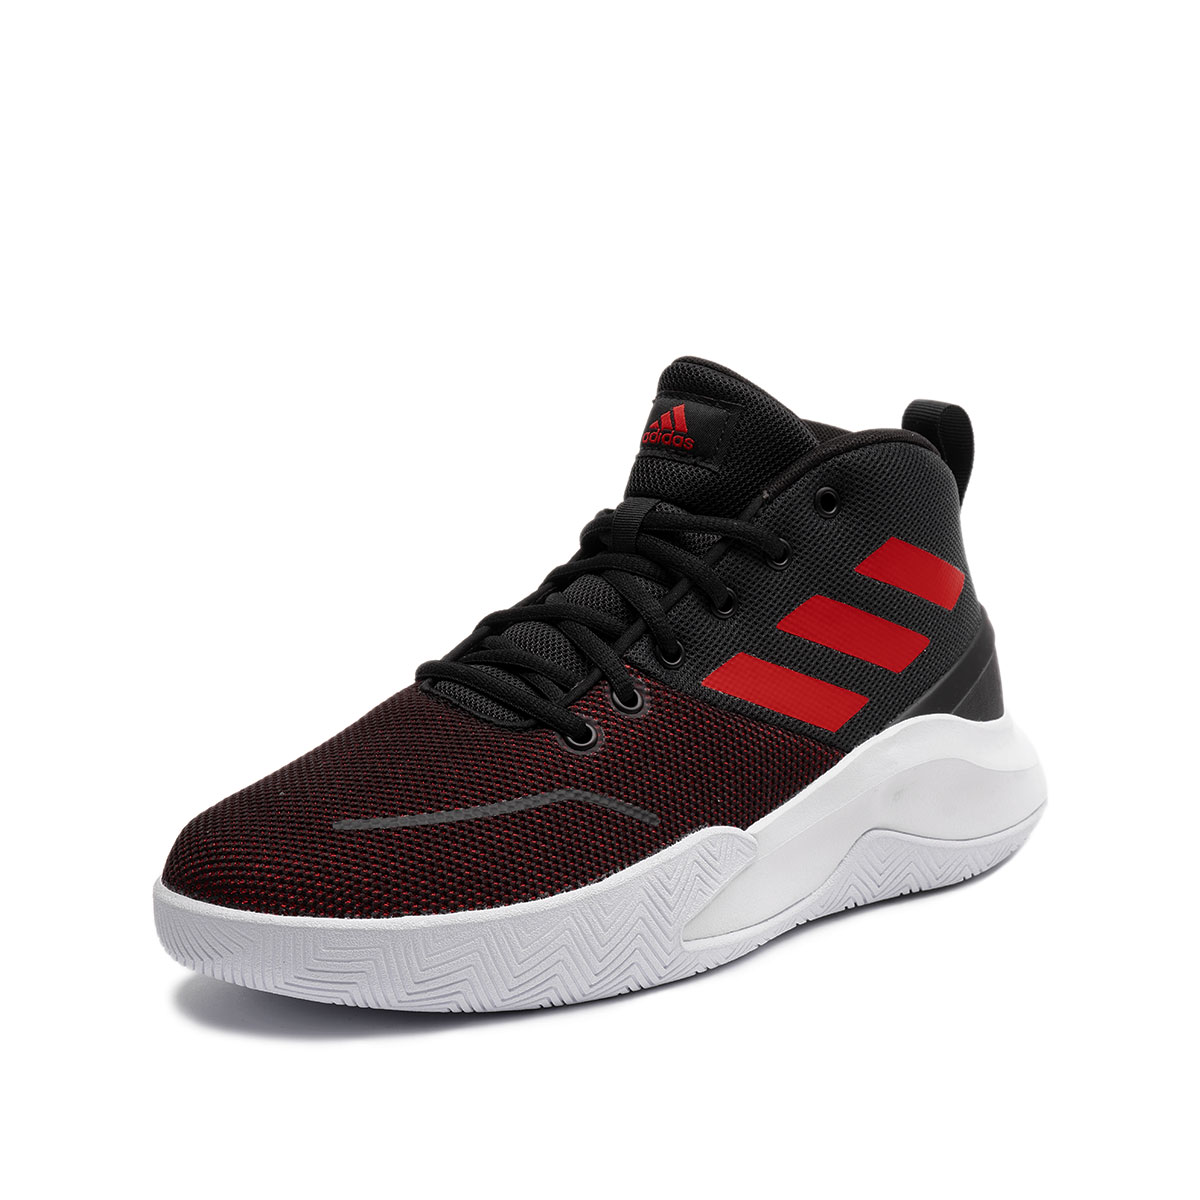 adidas Ownthegame  FY6008